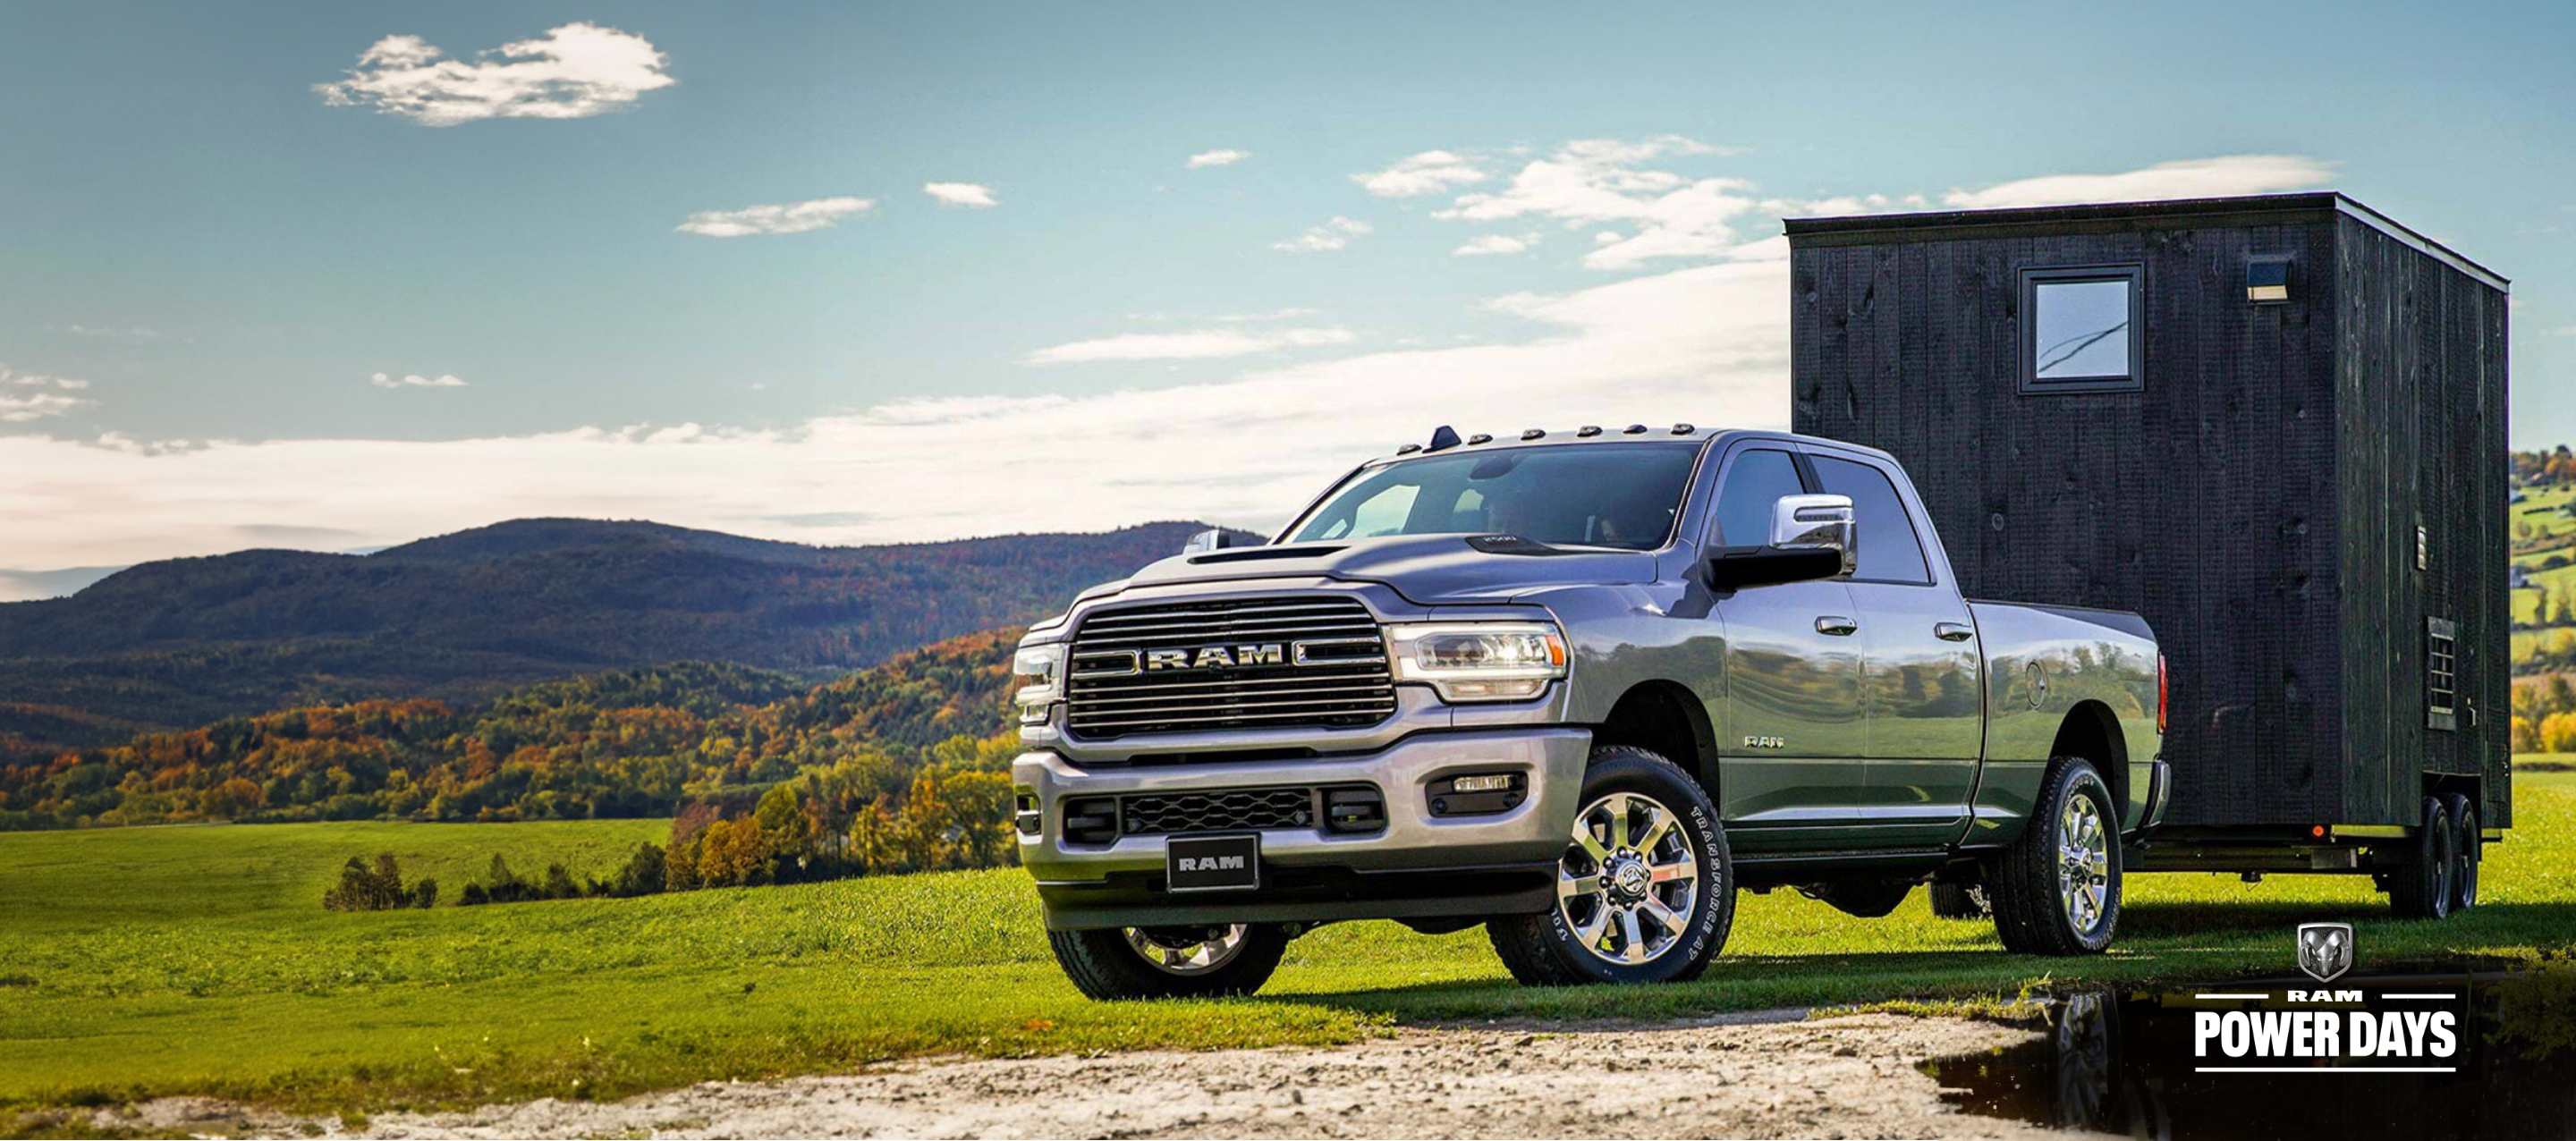 A 2023 Ram 2500 Laramie 4x4 Crew Cab towing a trailer parked on a grassy trail off-road. Power Days Sales Event.